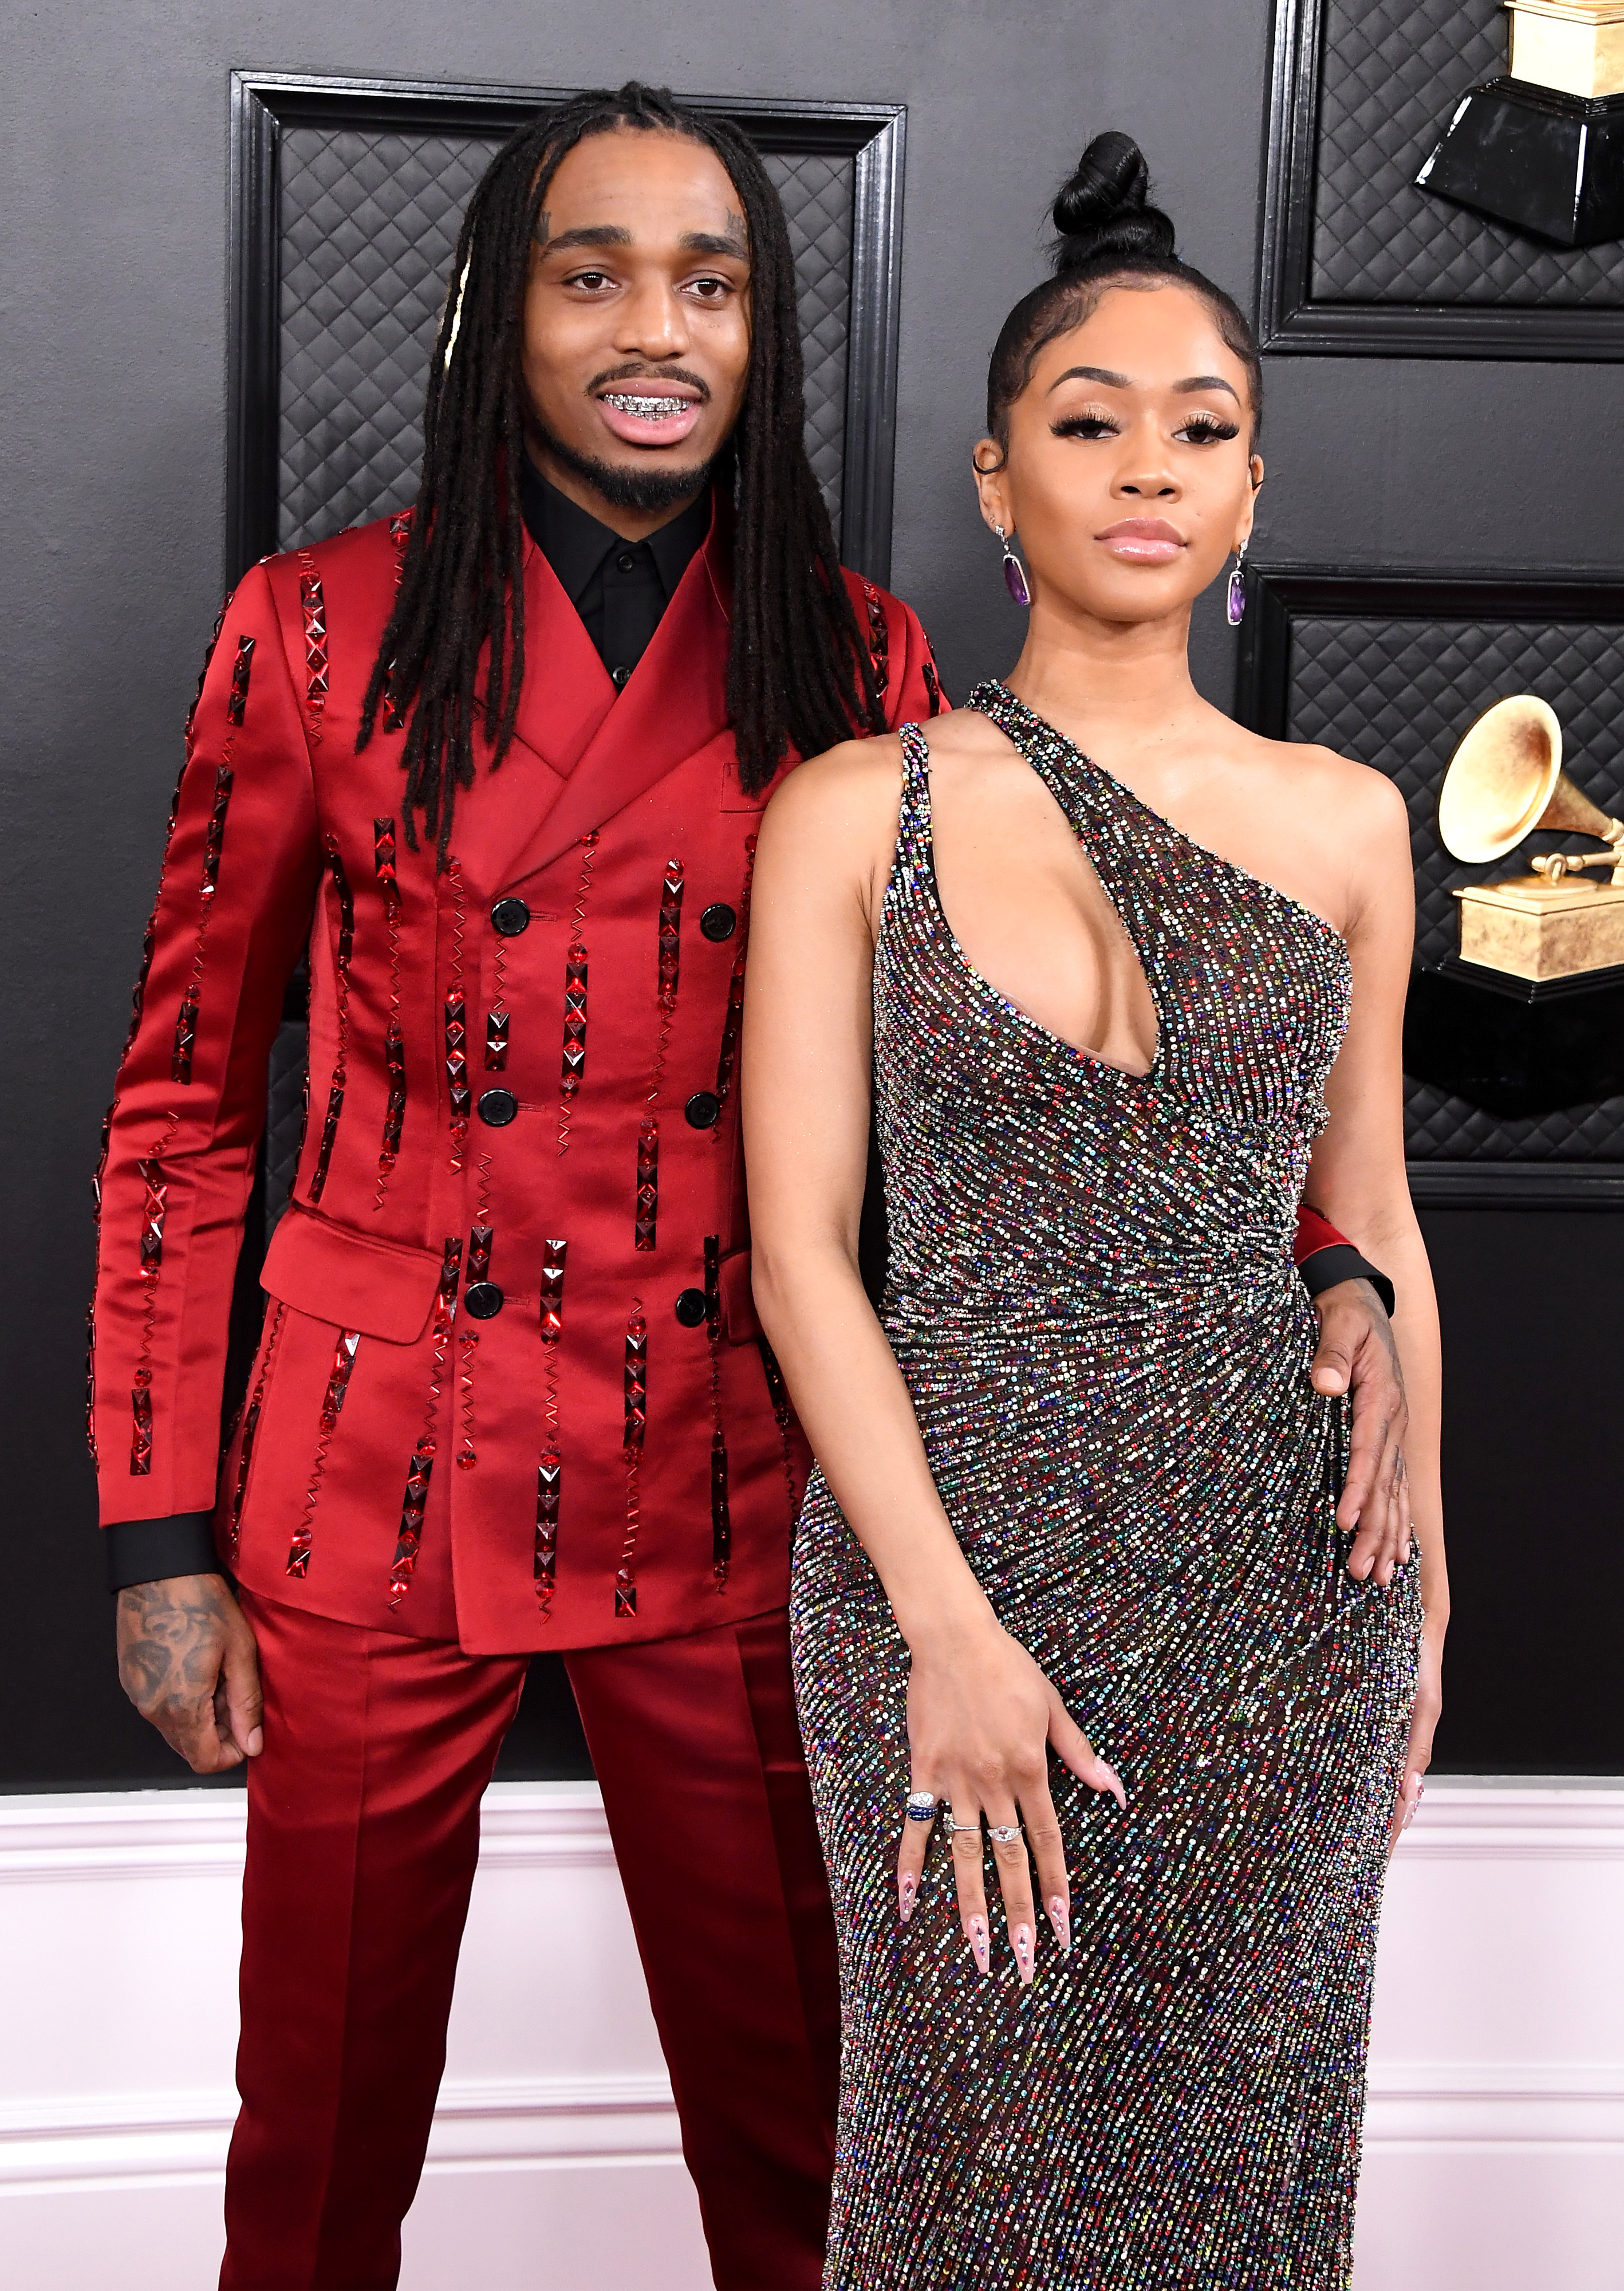 Quavo and Saweetie attend the 62nd Annual GRAMMY Awards at Staples Center on January 26, 2020, in Los Angeles, California. | Source: Getty Images